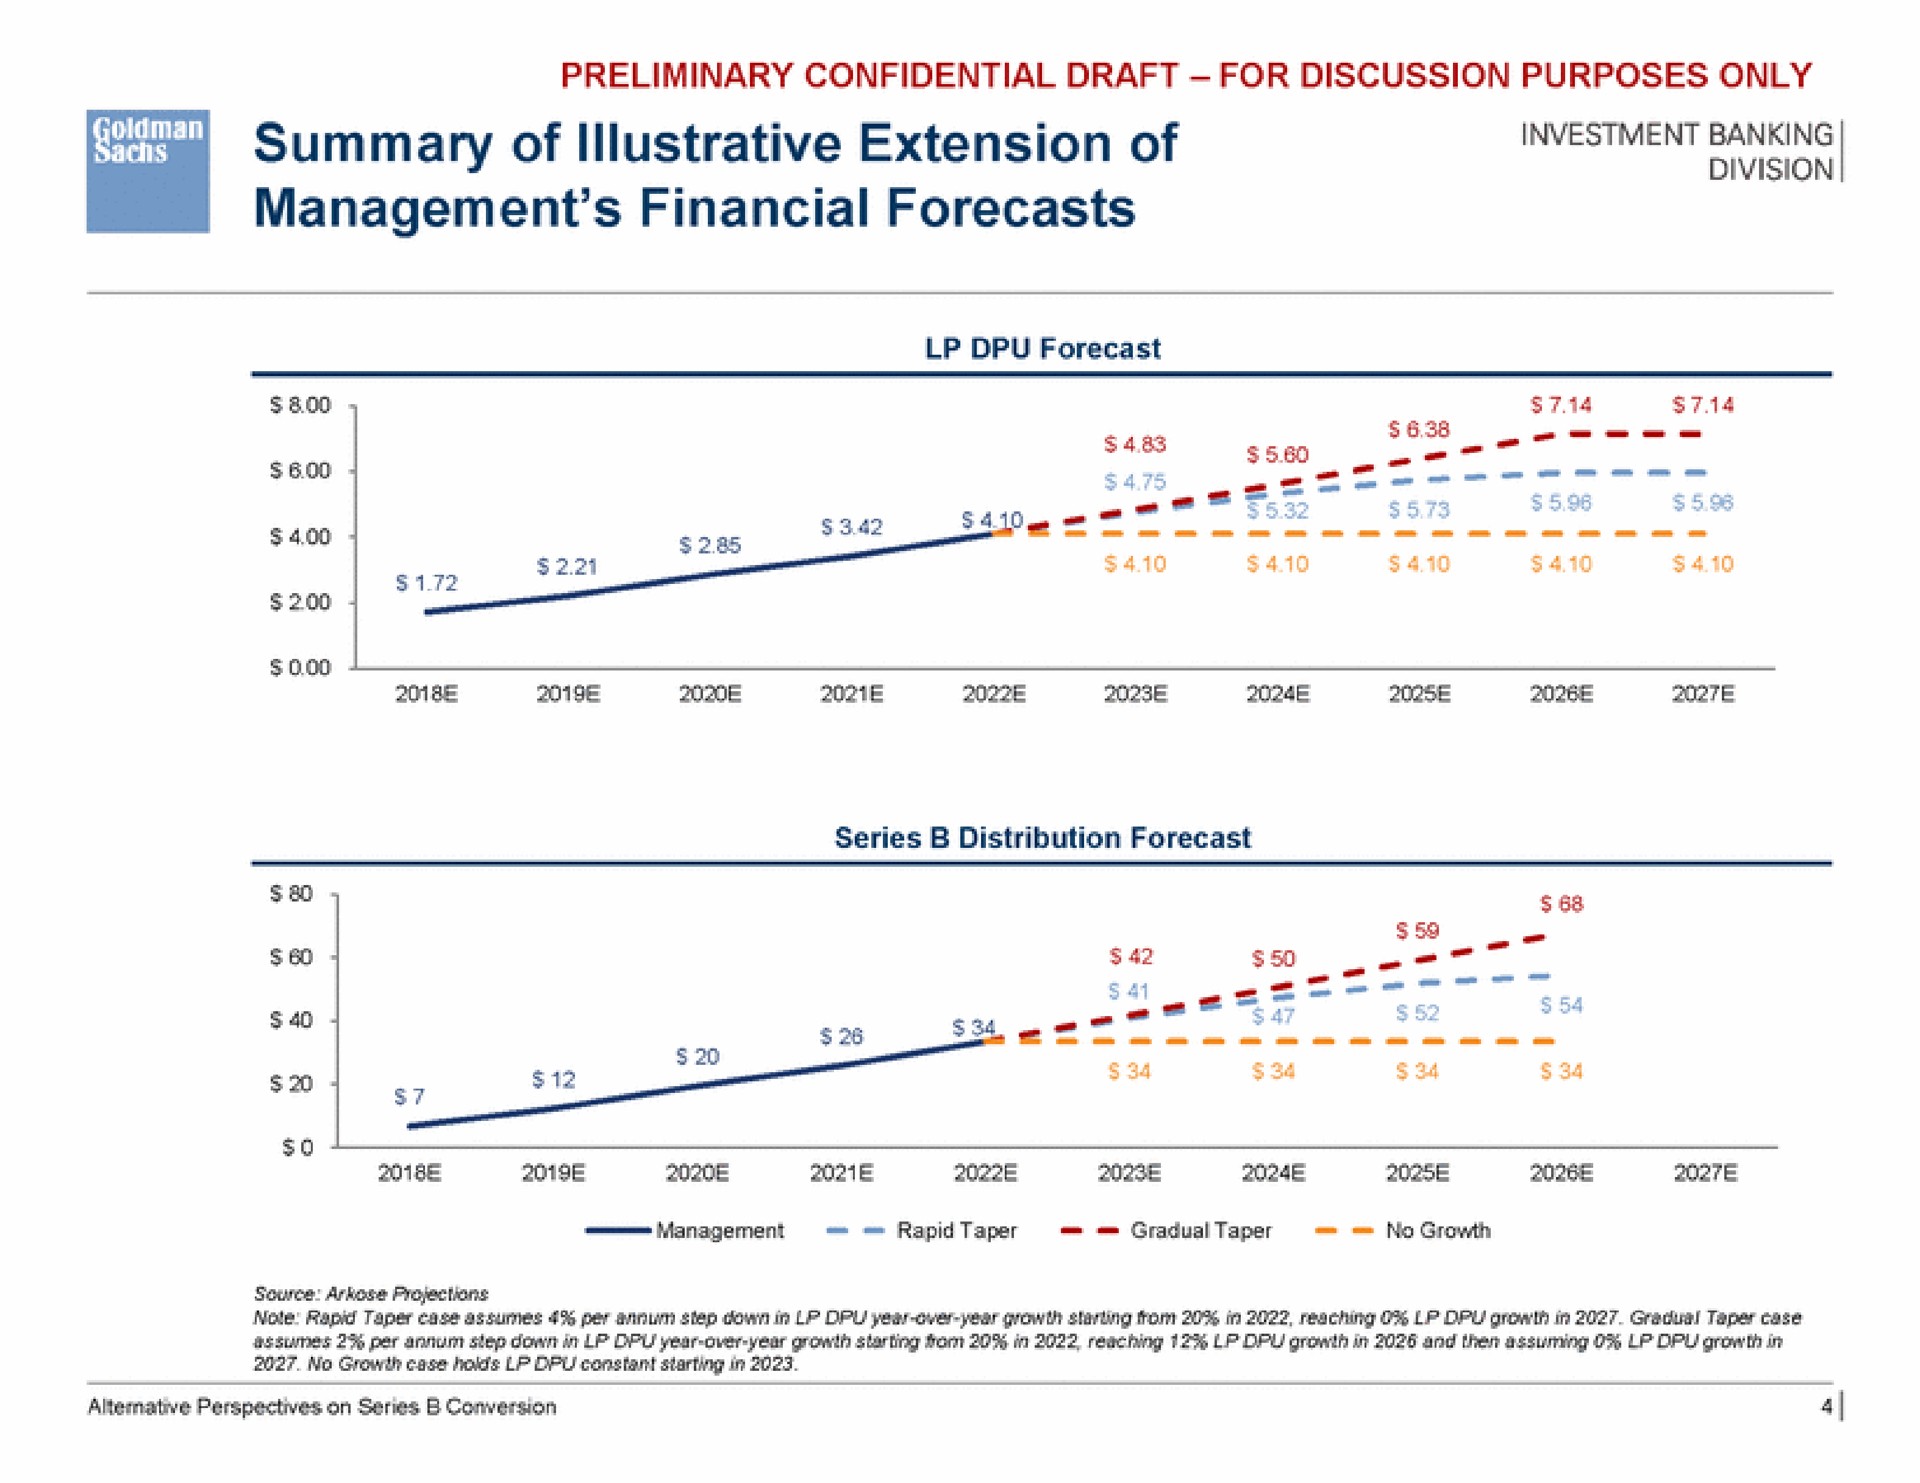 lee summary of illustrative extension of management financial forecasts | Goldman Sachs